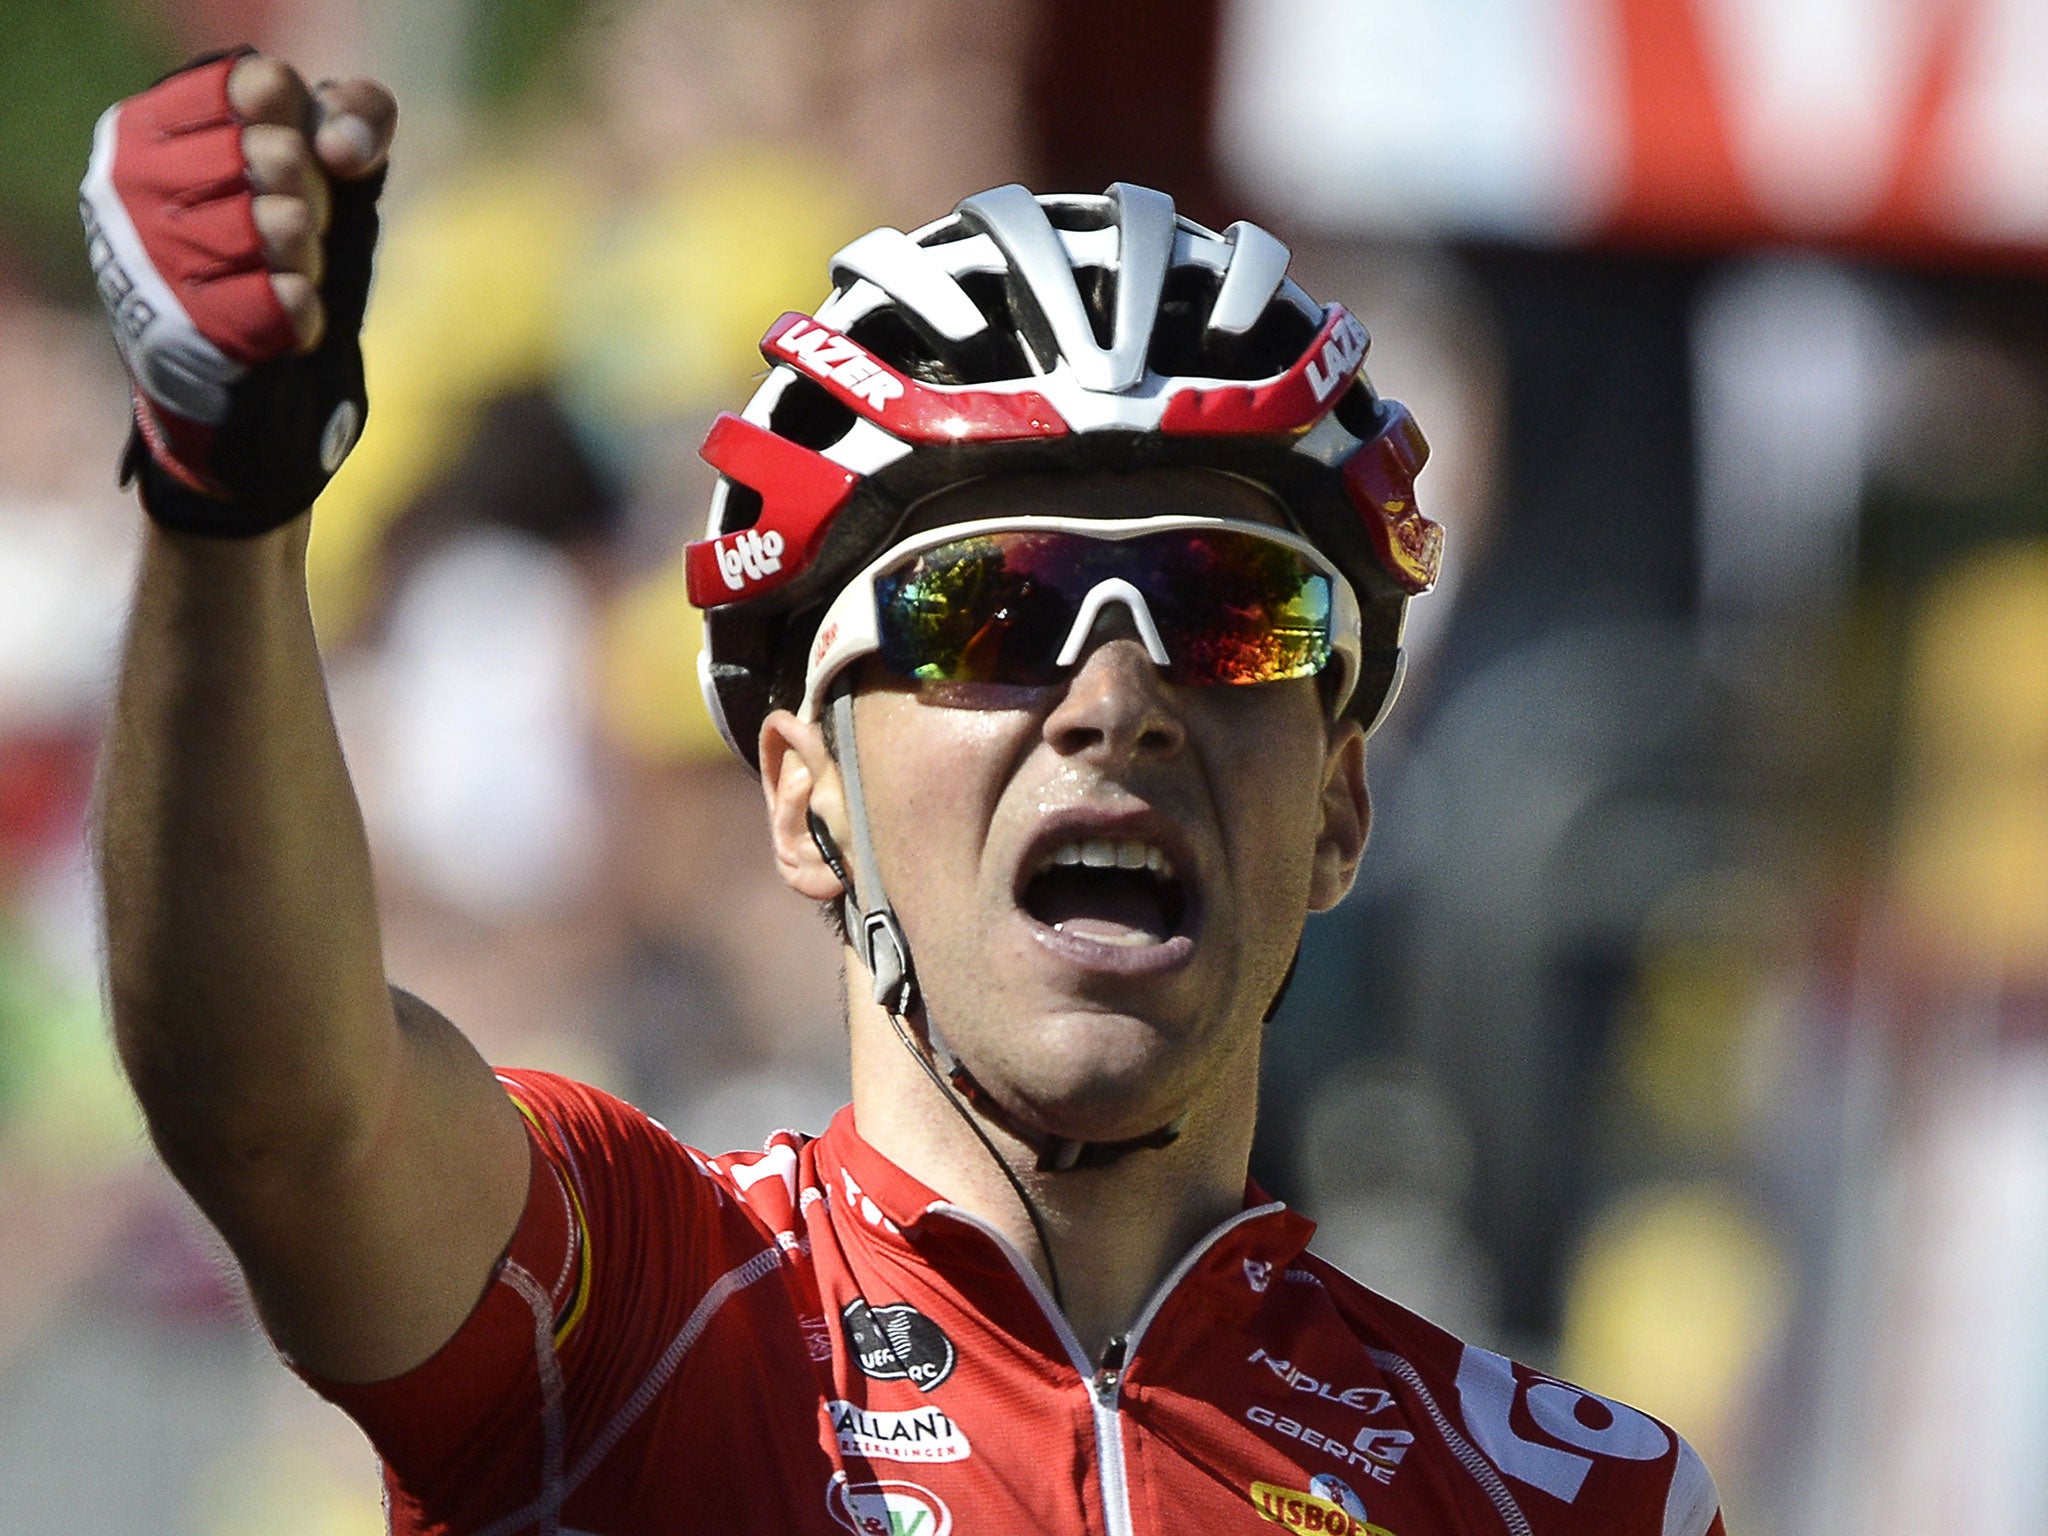 Tour de France 2014: Tony Gallopin sprints to success on stage 11 while Vincenzo Nibali stays in yellow | The Independent The Independent